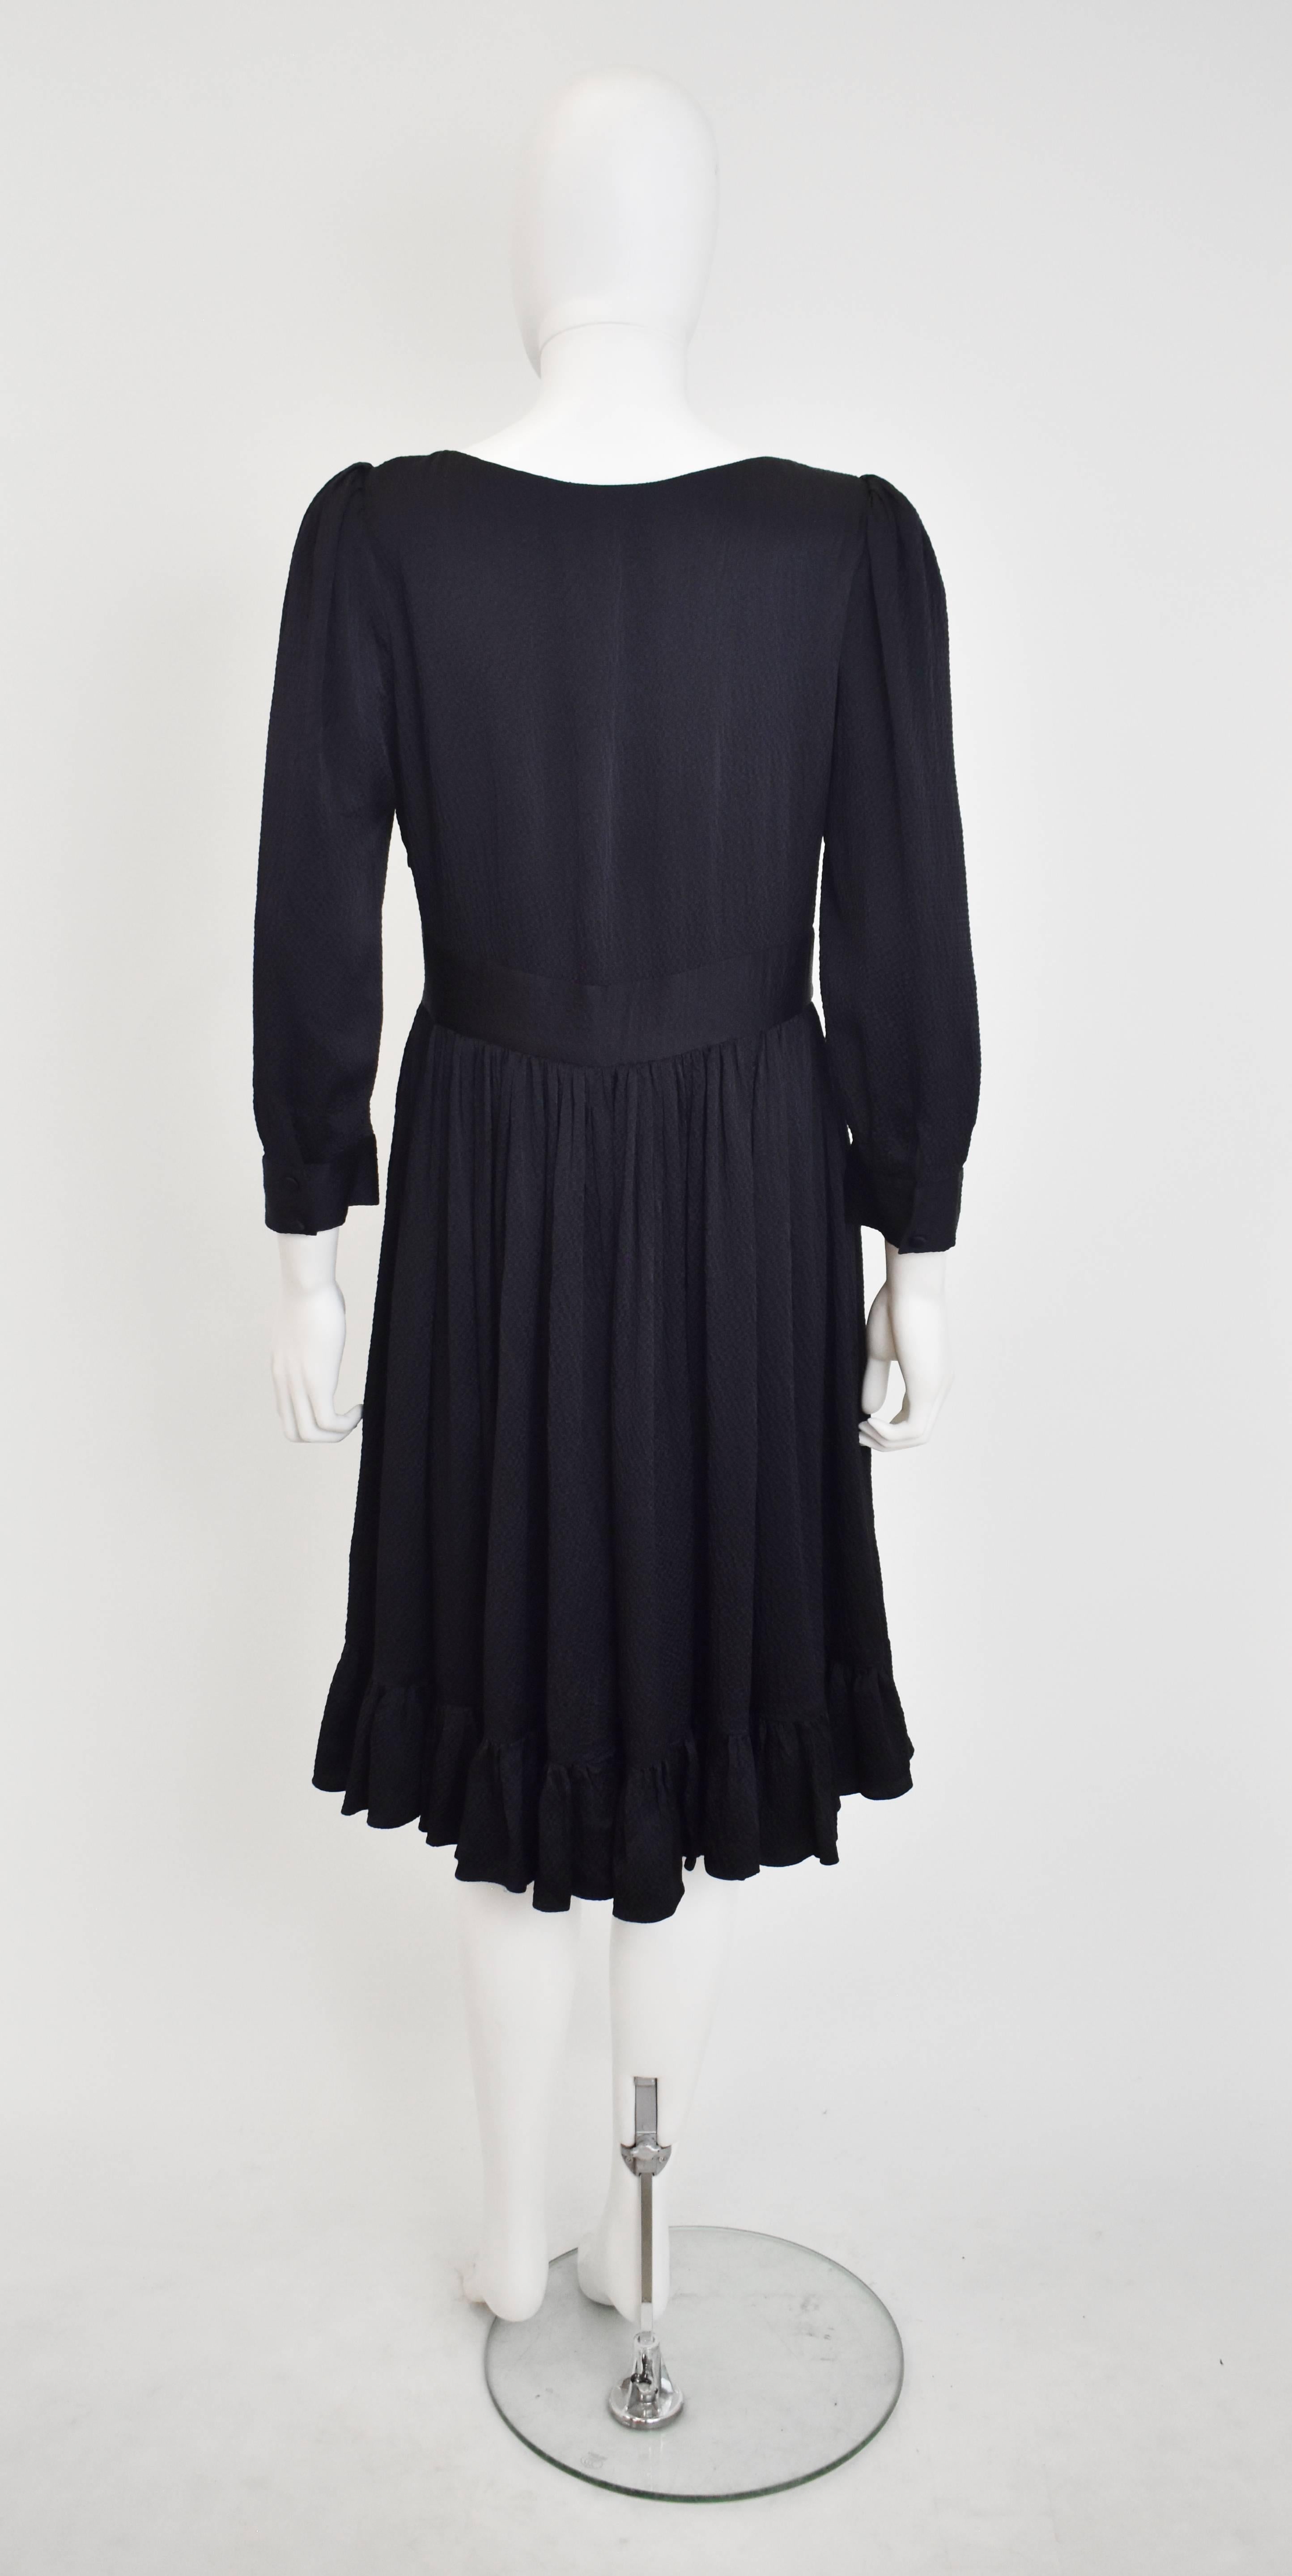 Balenciaga Black Silk Dress with Bell Sleeves and Ruffle Hem  In Excellent Condition For Sale In London, GB